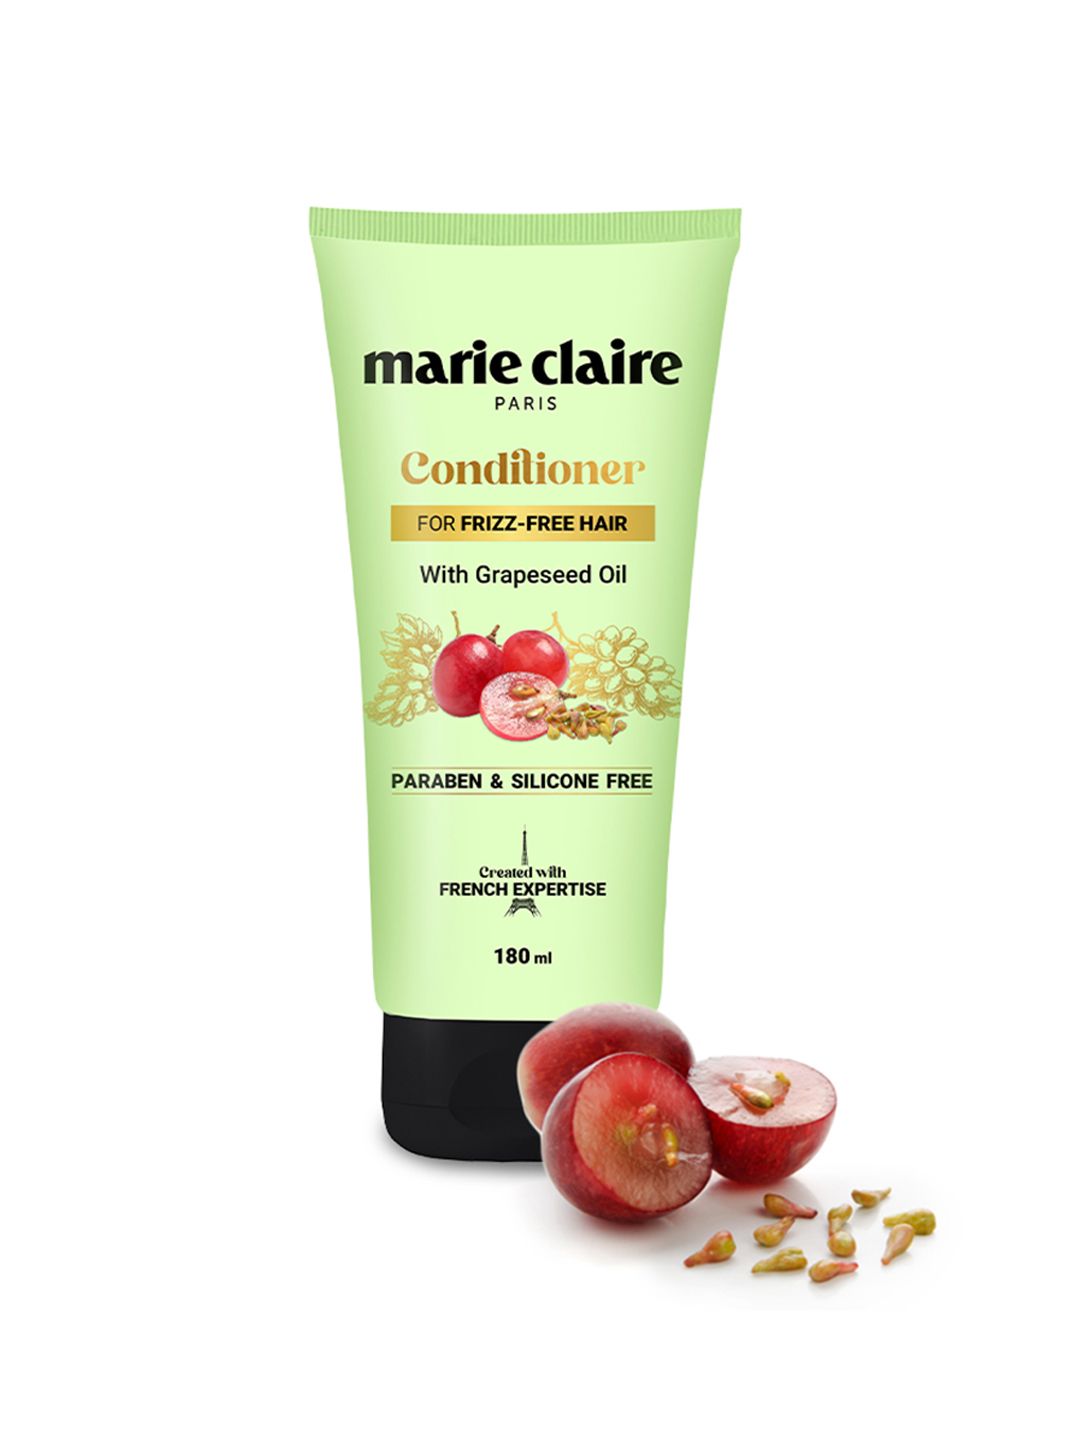 Marie Claire Conditioner for Frizz Free Hair 180 ml Price in India